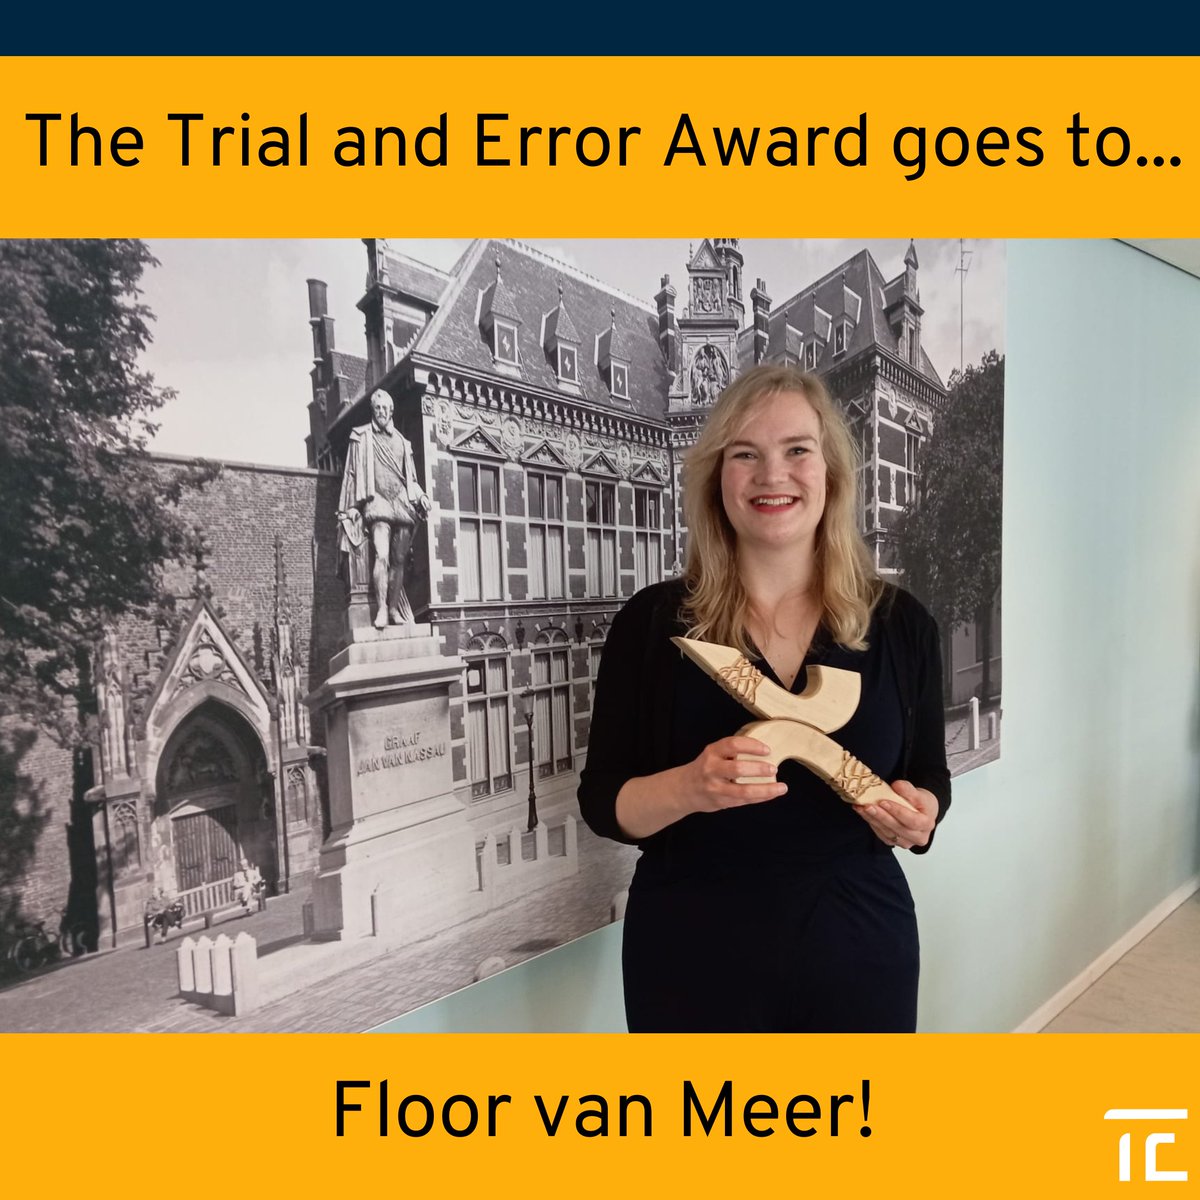 Today, psychologist Floor van Meer won the Trial and Error award for her study on the effect of car driving on snacking! Together with @UYA_Utrecht, we looked for a way to acknowledge the important role of trial and error in science. The result: a price for 'failed' research! 1/2